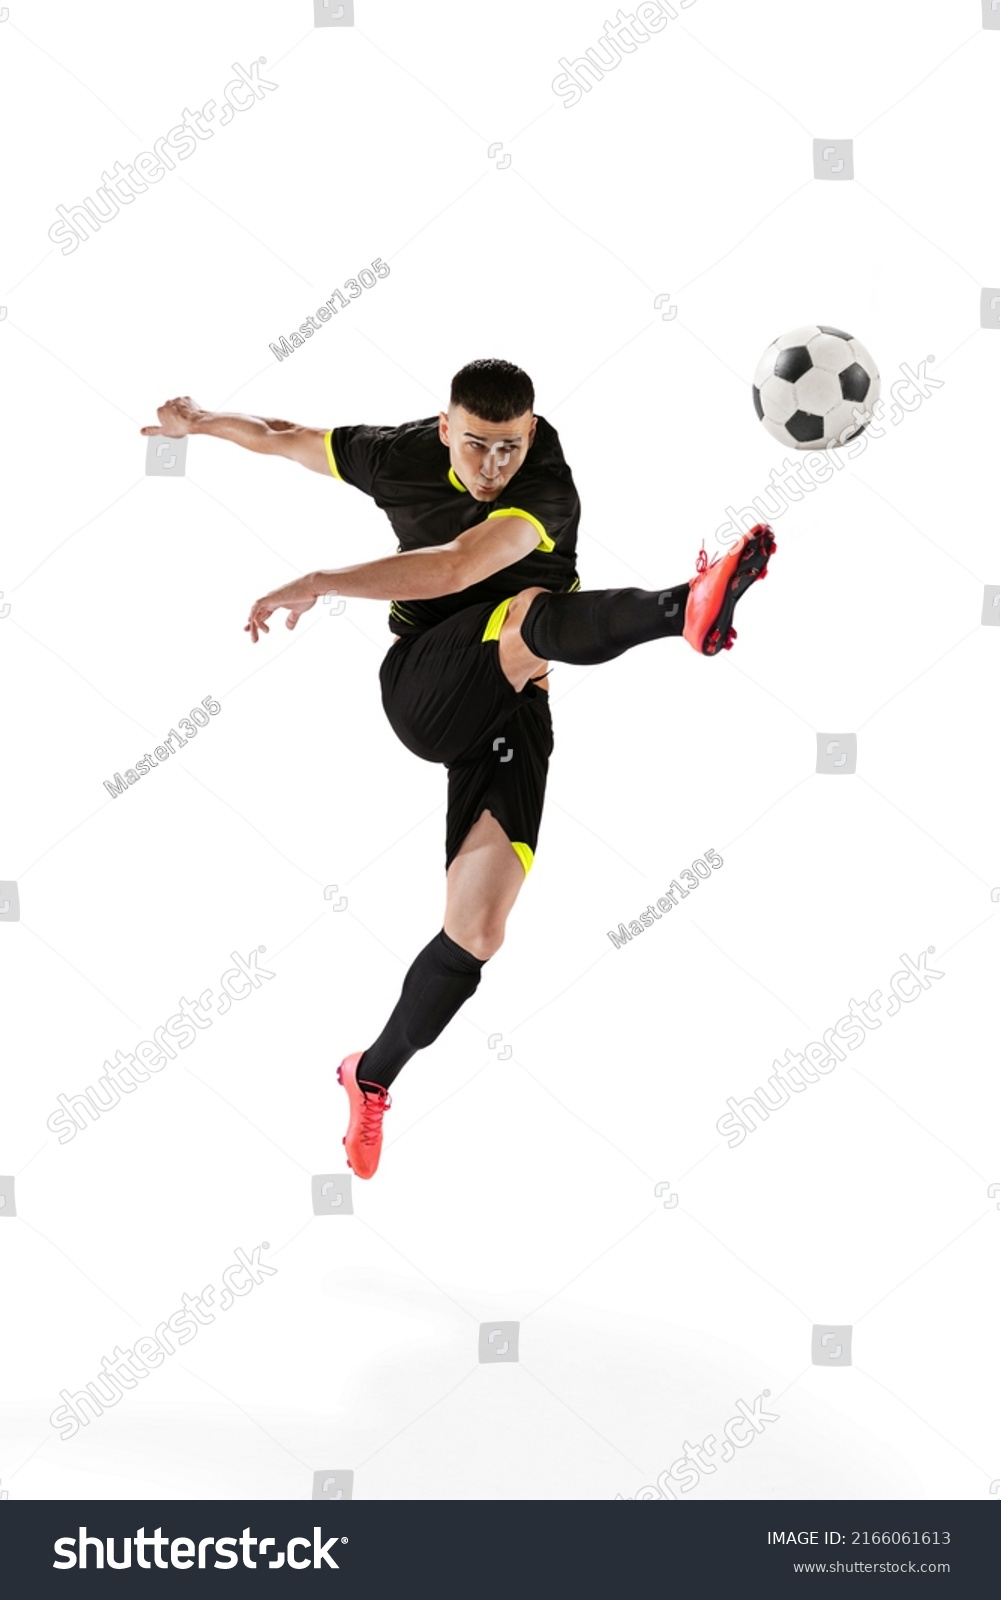 Professional male football soccer player in motion and action isolated on white studio background. Concept of sport, goals, competition, hobby, ad, world cup. Sportsmen wearing black football kit #2166061613